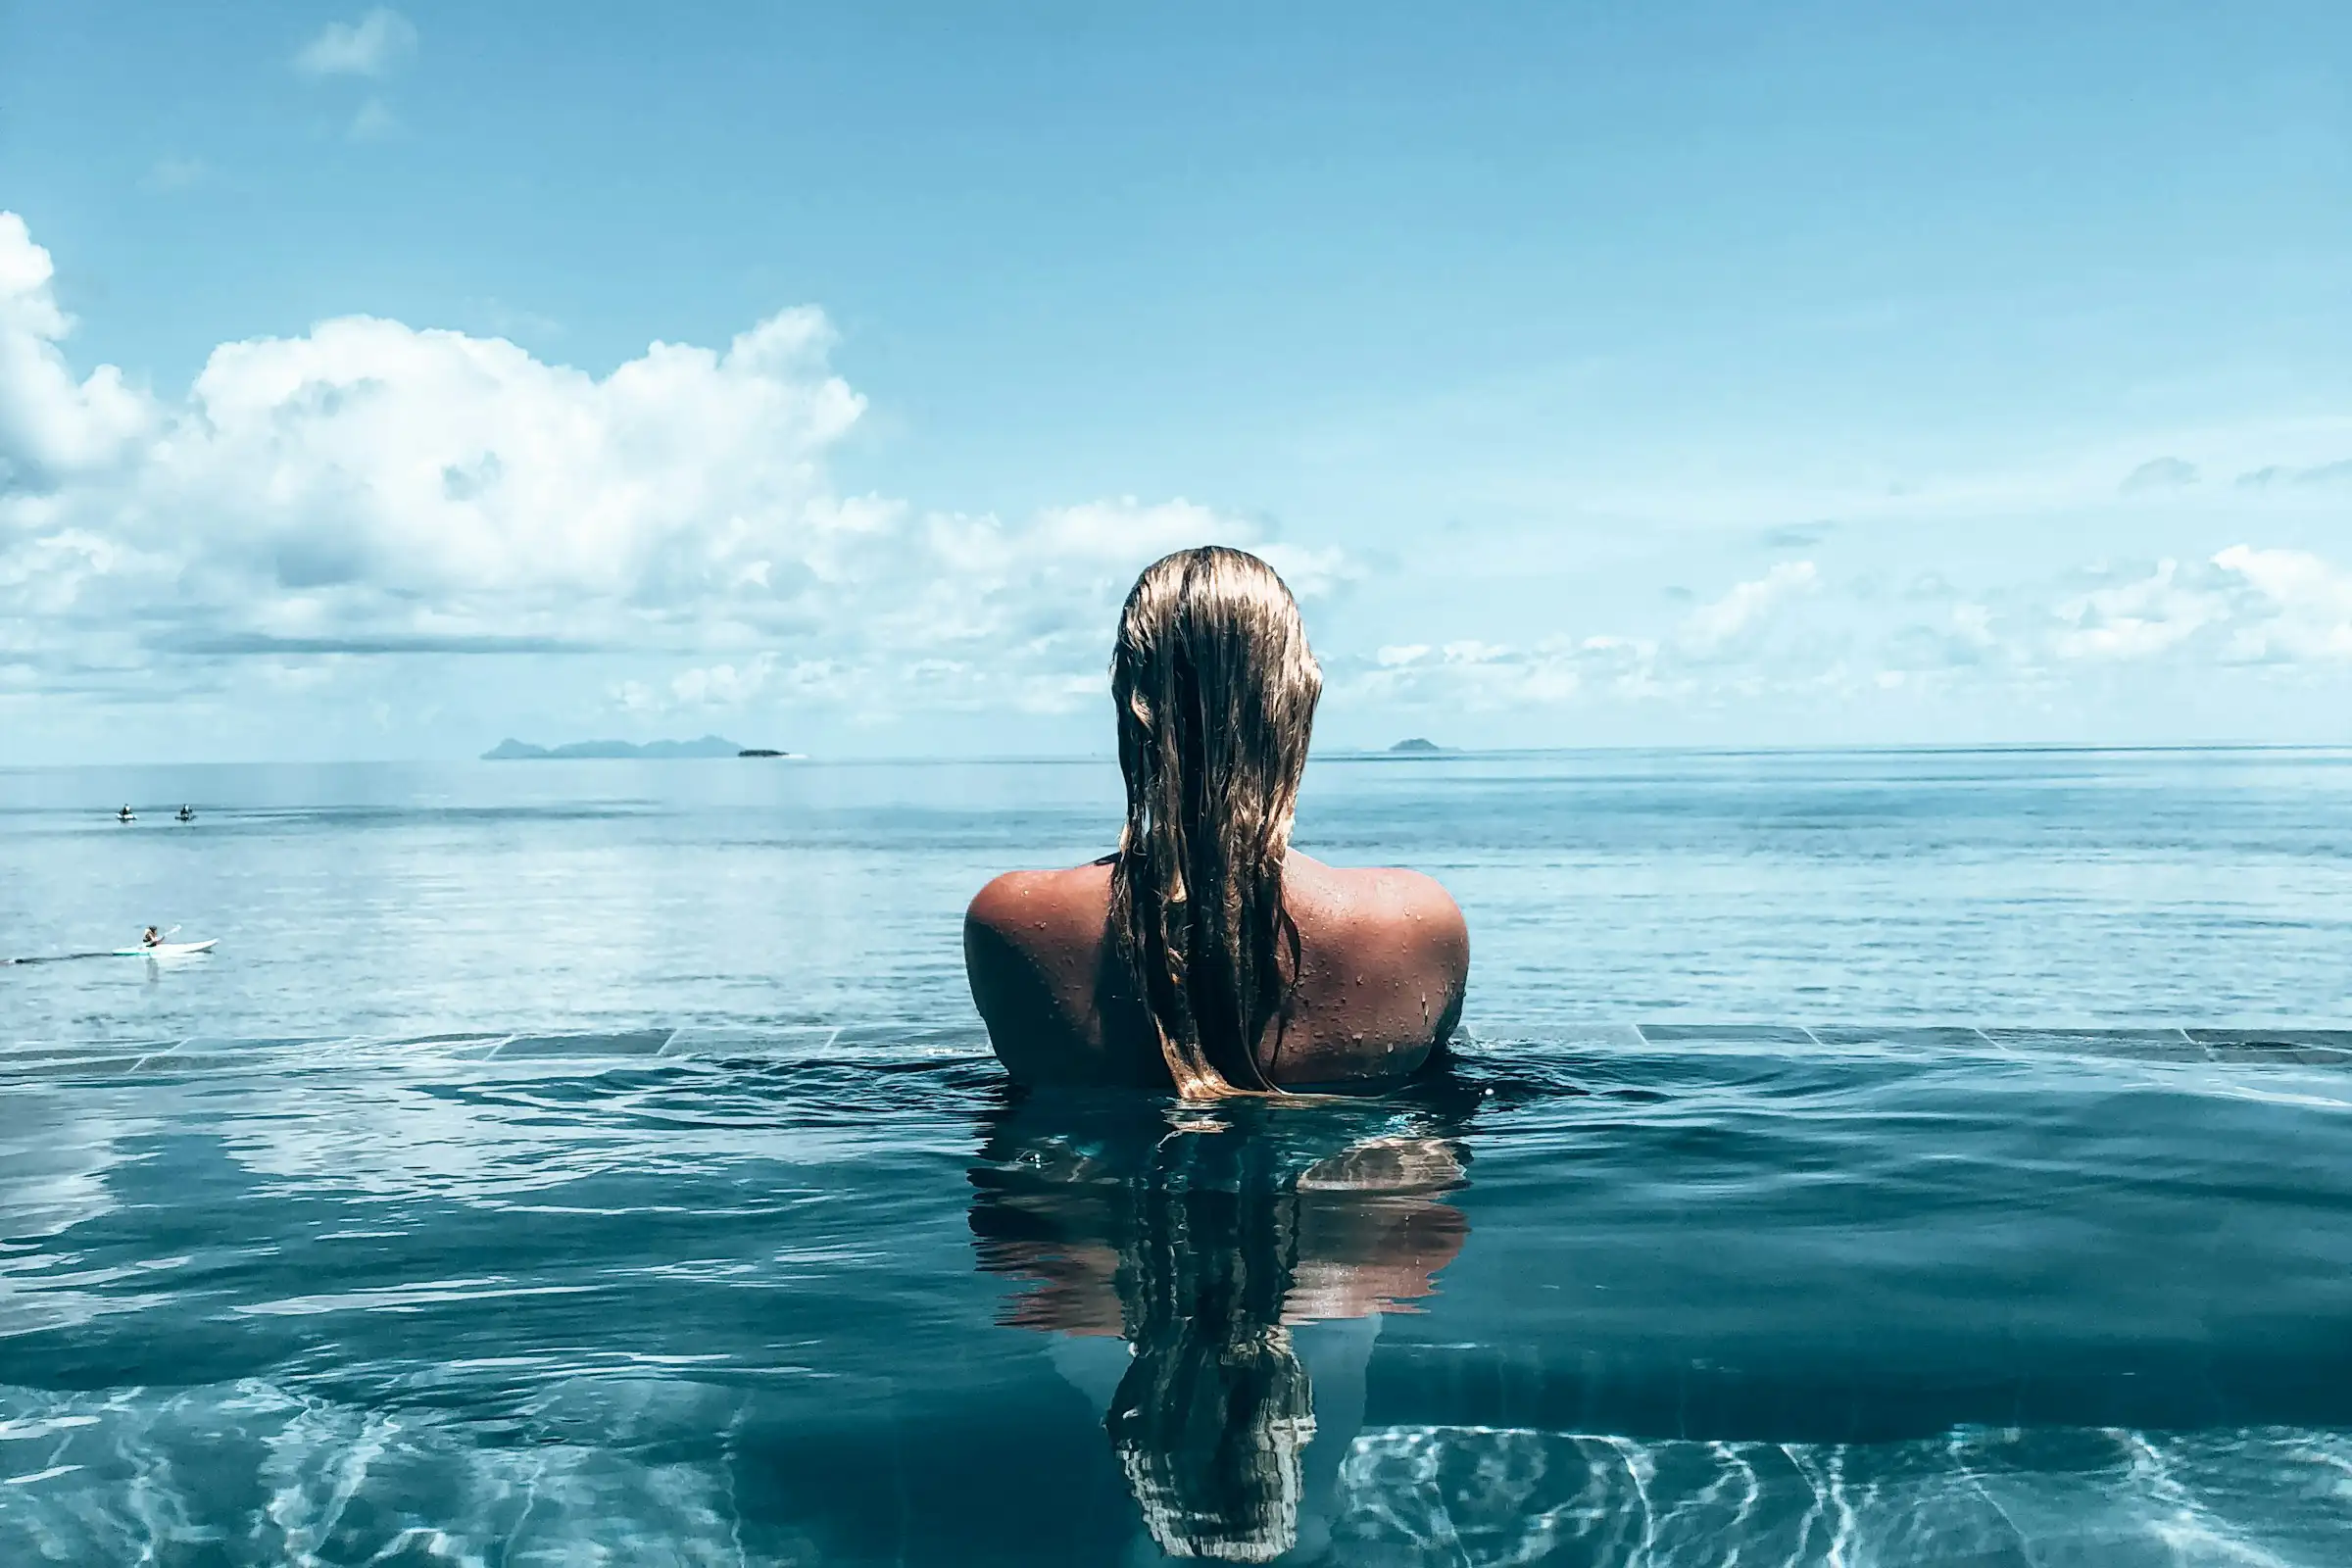 A woman in an infinity pool stares out at the ocean